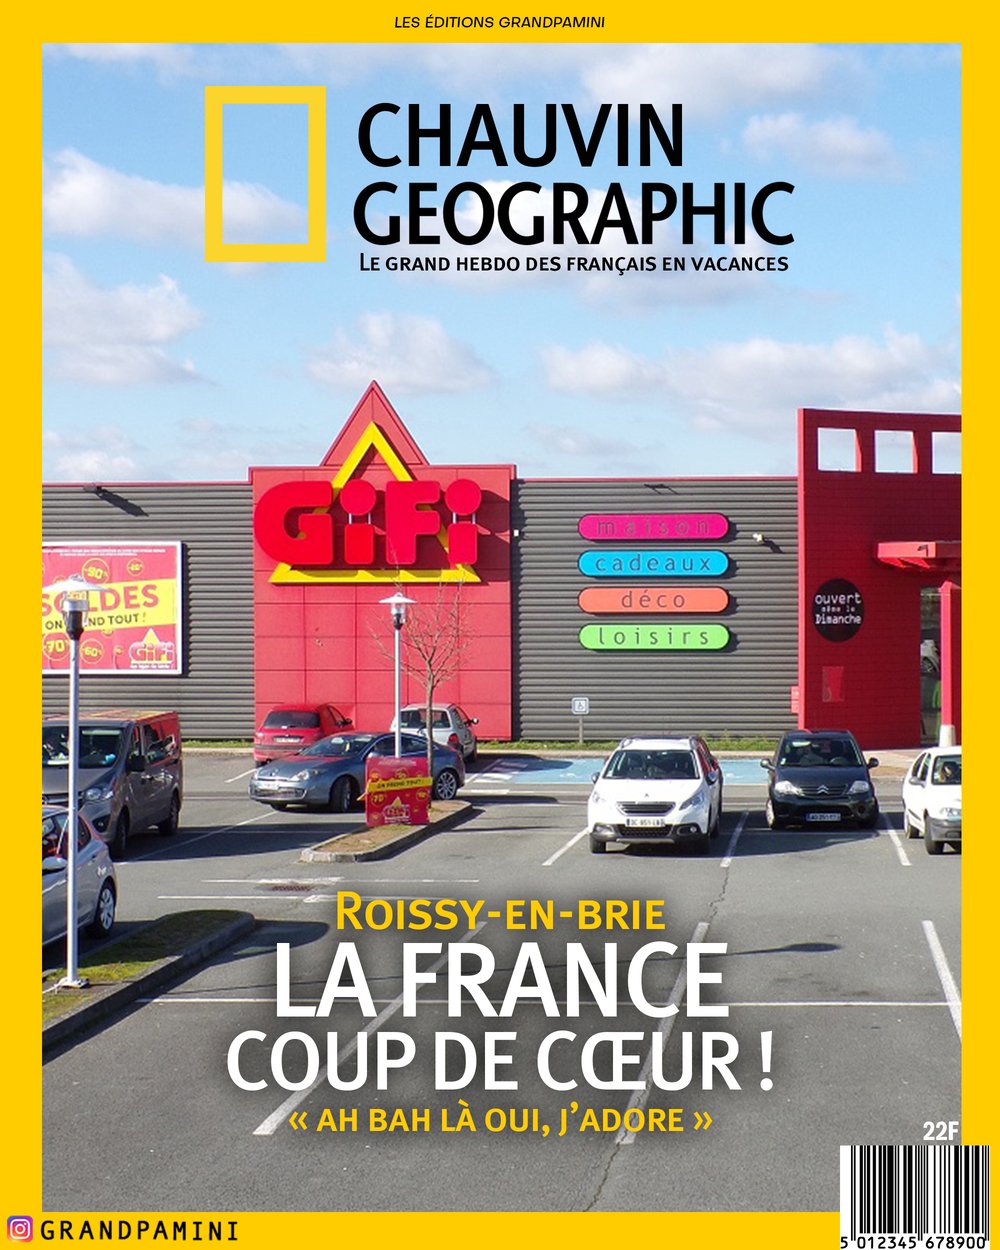 Poster CHAUVIN GEOGRAPHIC